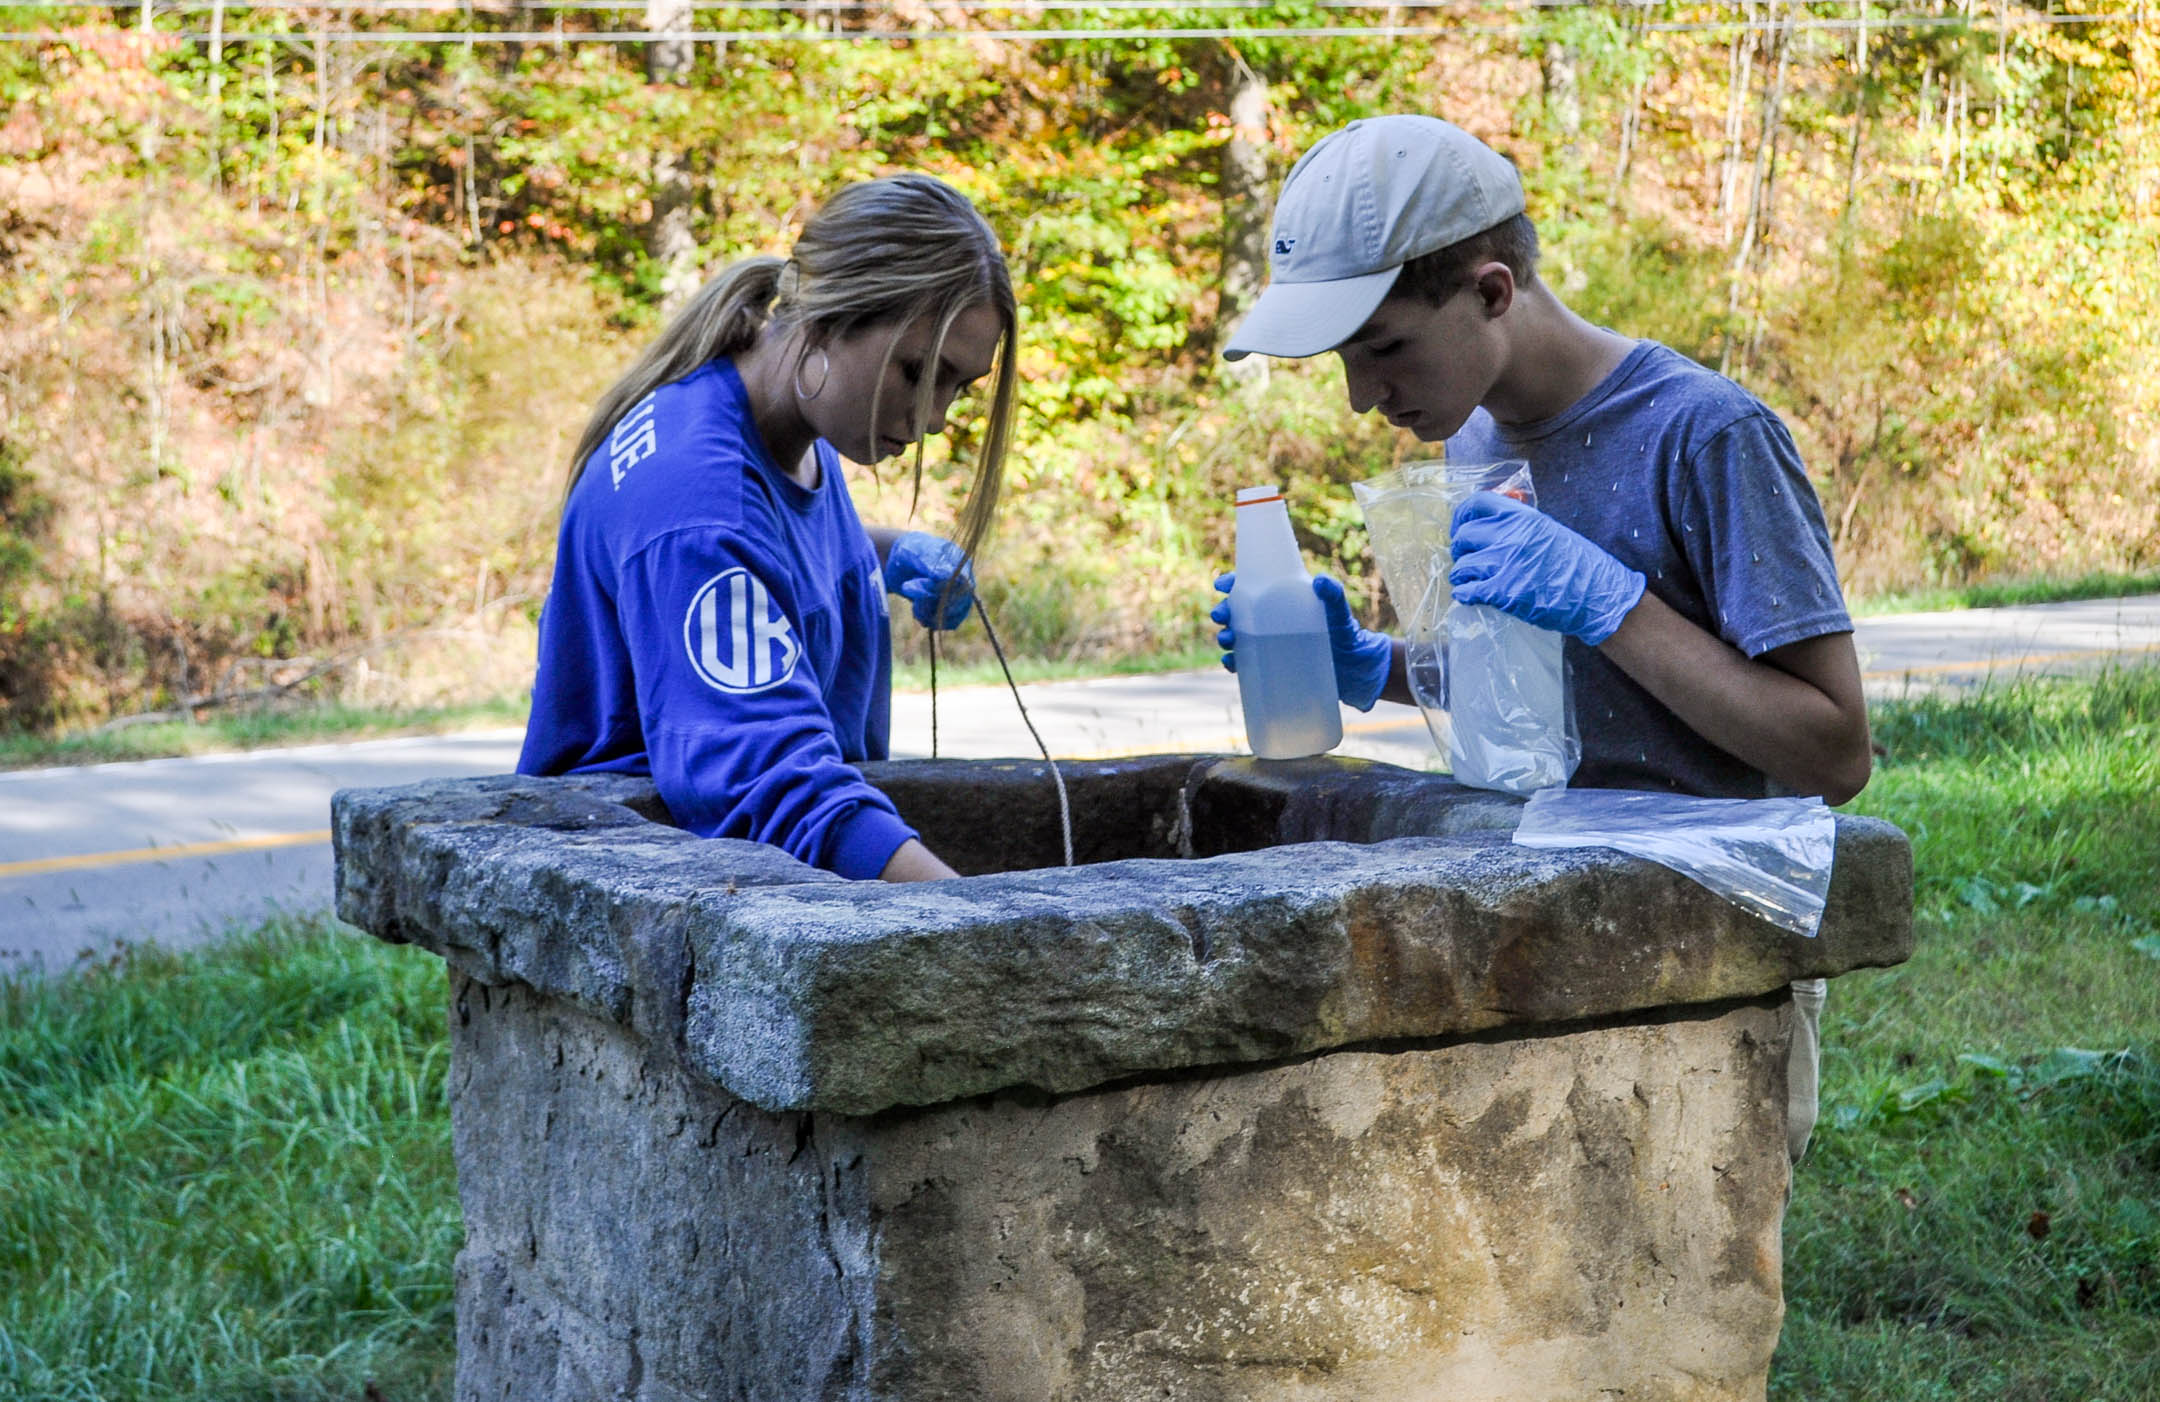 Belfry High School (Pike County) students Aryn Adkins and Austin Dillon collect water from a well in Pike County. Adkins and Dillon are two of the four students that will be traveling to India later this year to present their findings about groundwater quality as part of the U.S. Department of State's Mission to India program. Submitted picture by Carlie McCoy